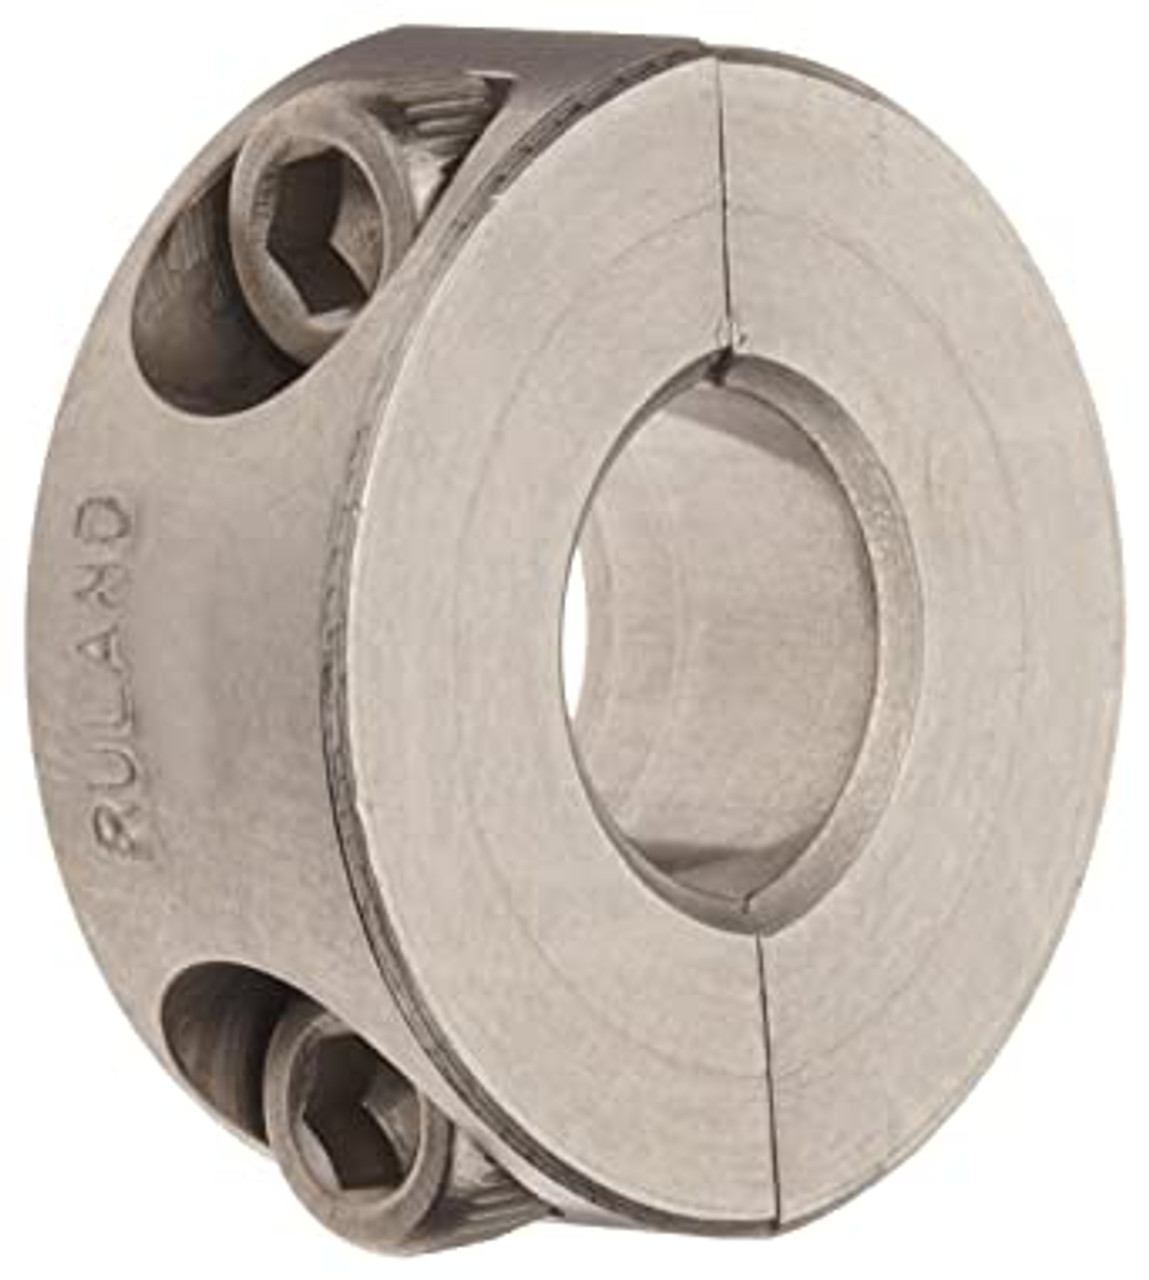 Ruland SP-18-SS 1 1/8" Two-Piece Shaft Collar